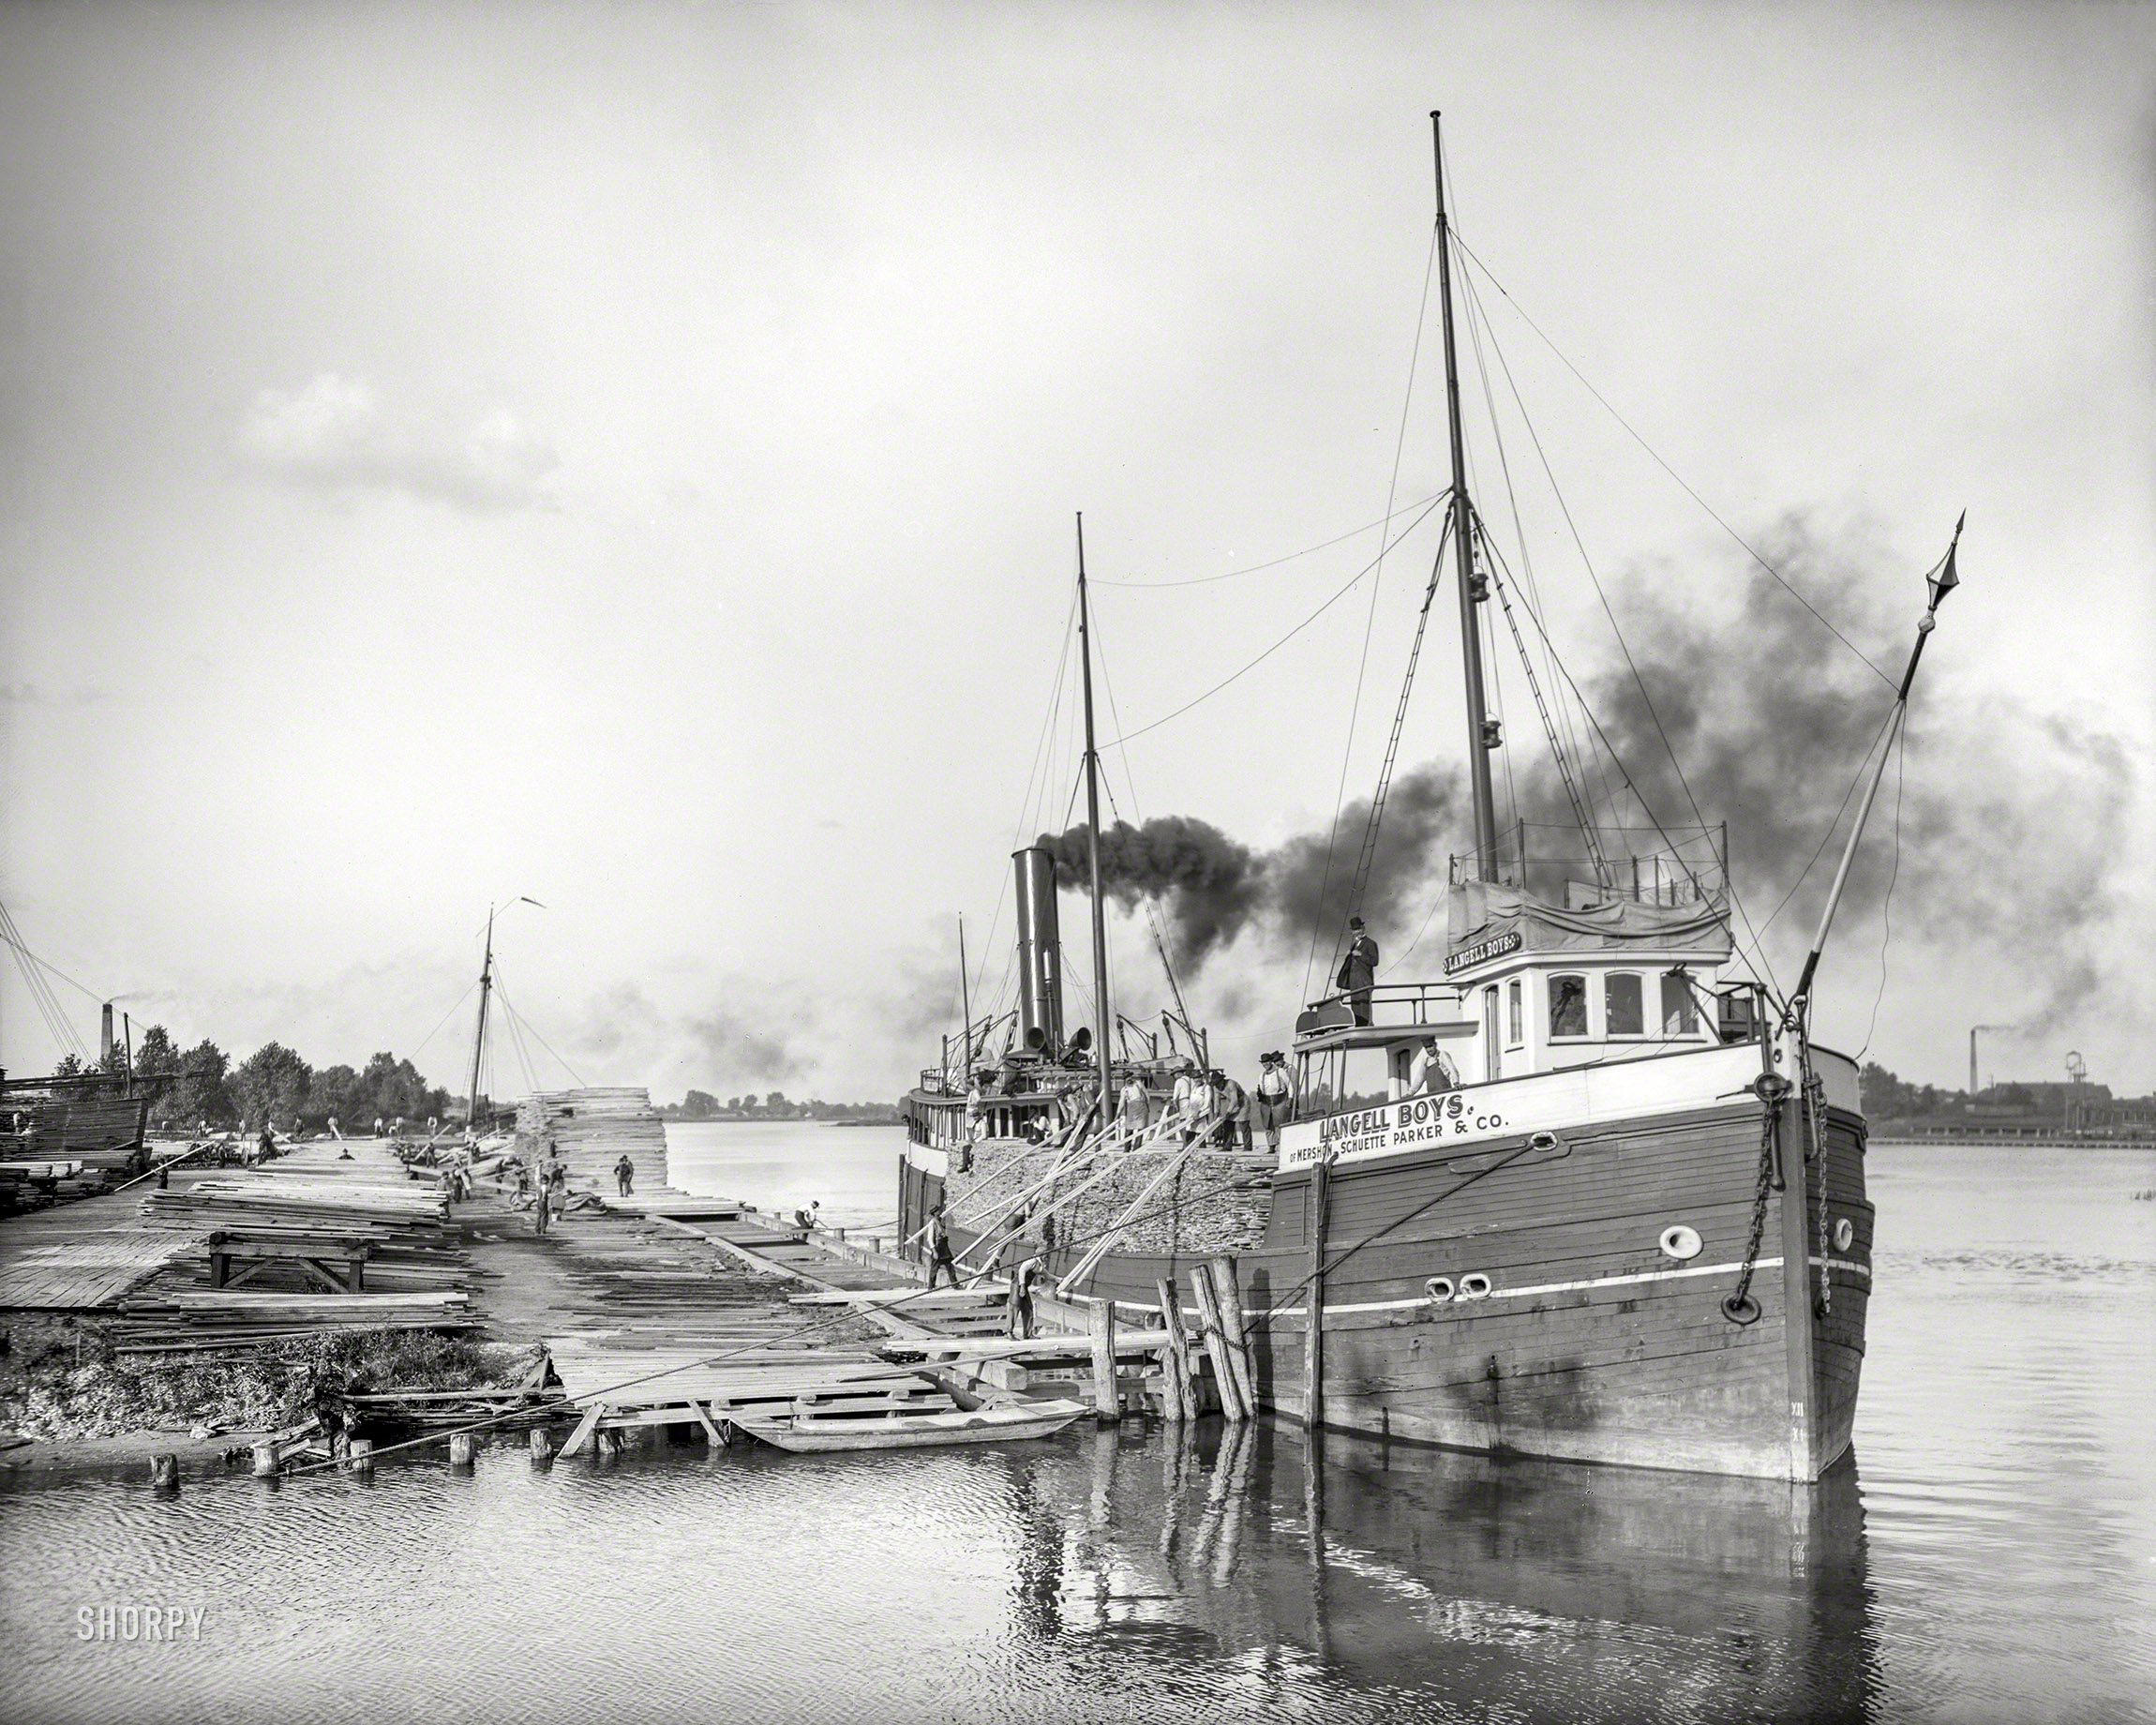 &nbsp; &nbsp; &nbsp; &nbsp; Named for the seven sons of shipbuilder Simon Langell, the steam barge "Langell Boys", launched in 1890, hauled lumber until she burned and sank in Lake Huron in 1931.
Circa 1908. "Lumber hooker Langell Boys unloading at Saginaw, Michigan." 8x10 inch dry plate glass negative, Detroit Publishing Company. View full size.